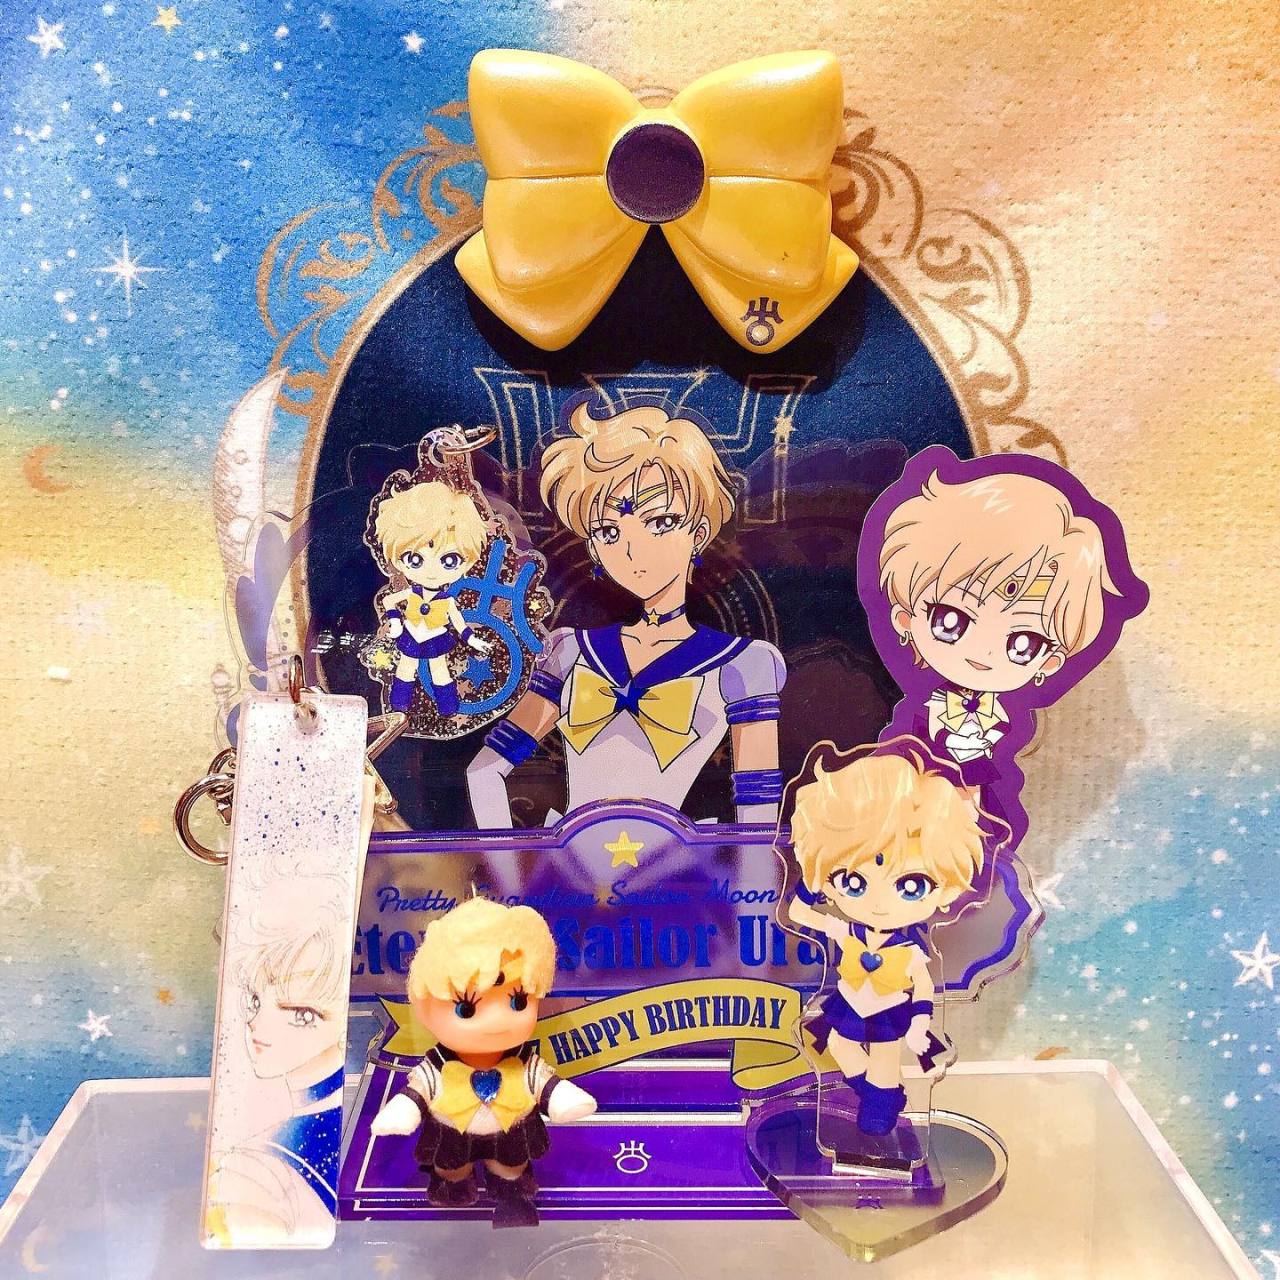 Some posts from the Sailor Moon Store’s official Instagram page in celebration of Haruka Ten’ô’s birthday (January 27). #sailor uranus#haruka tenoh#amara#haruka#merchandise#sailor moon #sailor moon store  #the little kewpie dolls will never not kill me